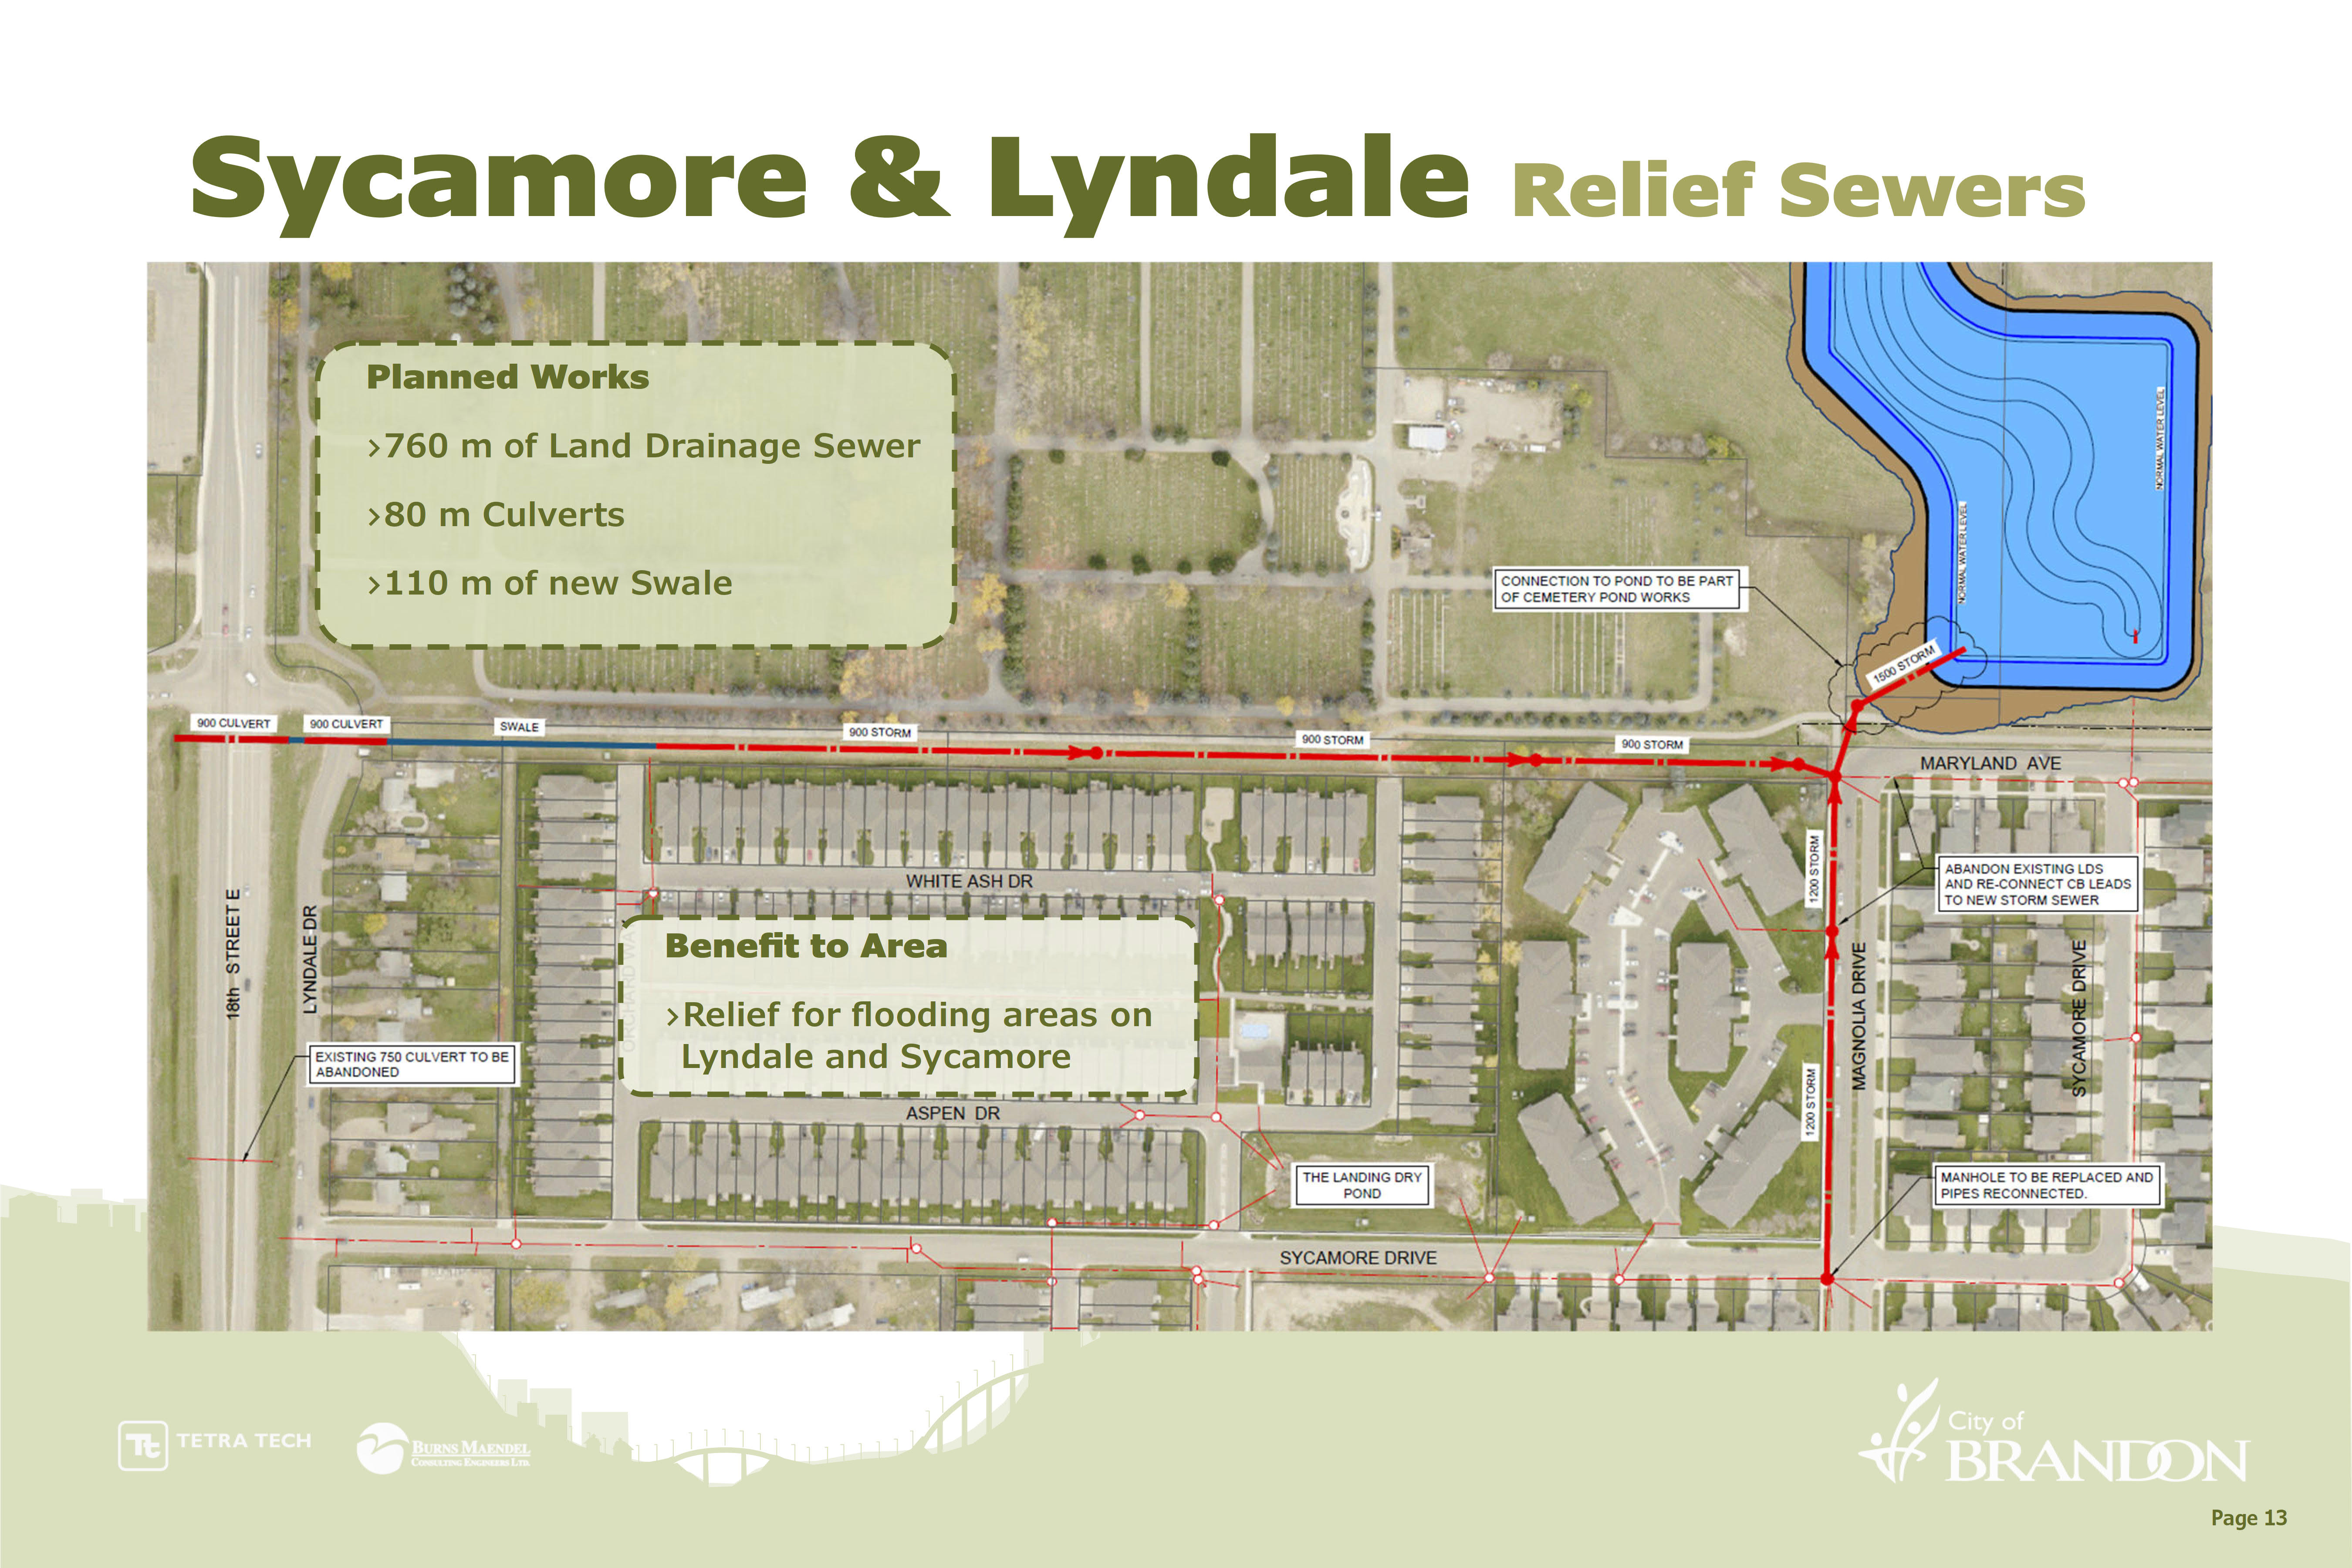 Sycamore & Lyndale Relief Sewers